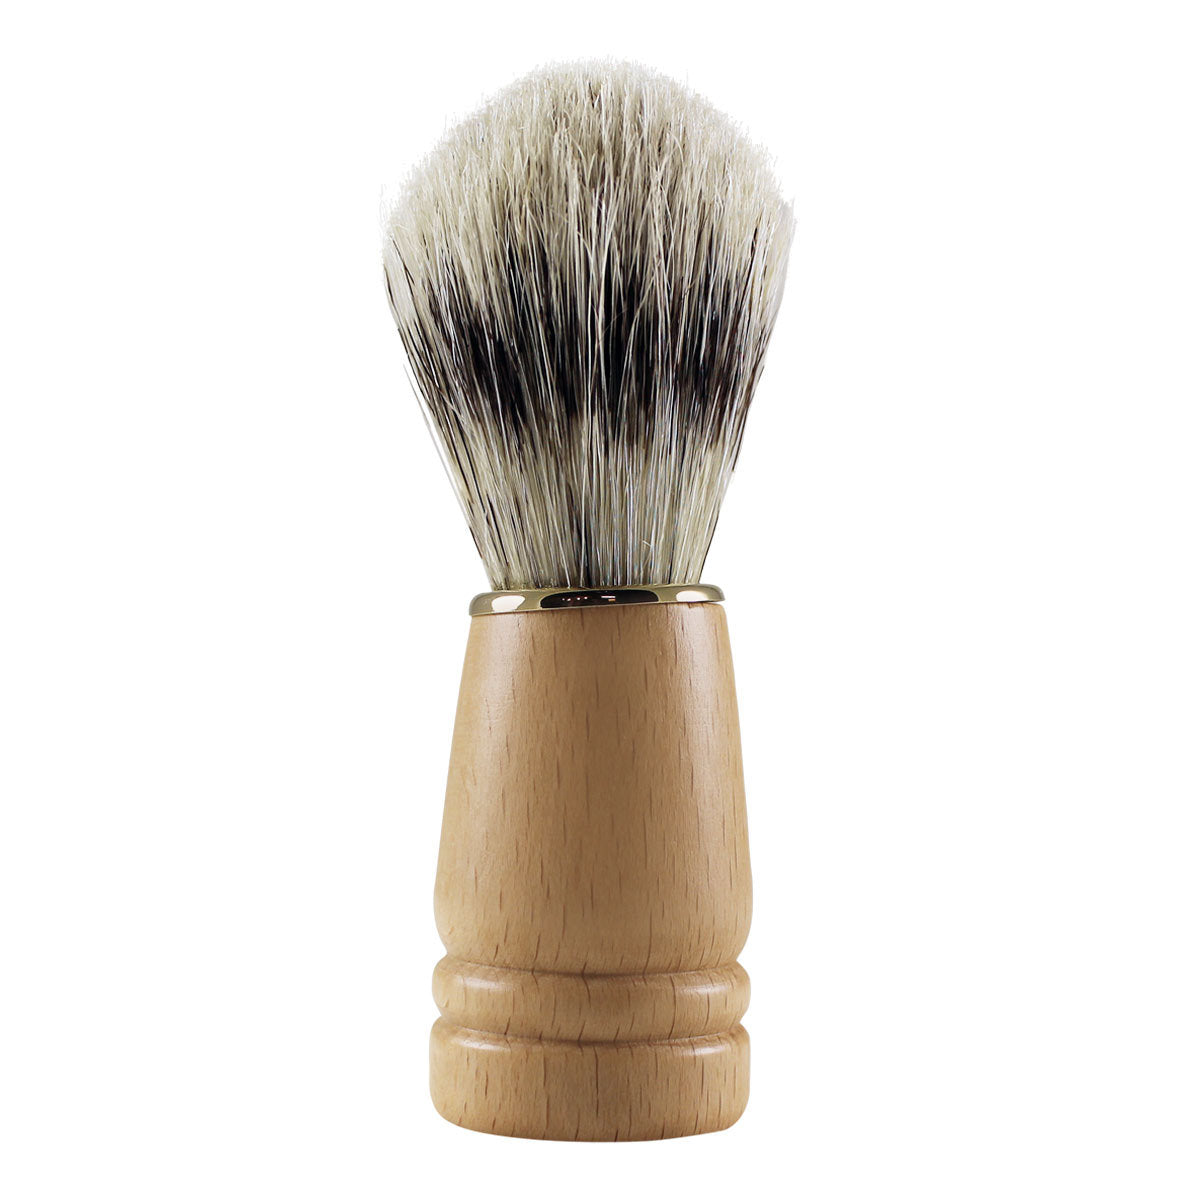 Primary image of Natural Wood Shave Brush